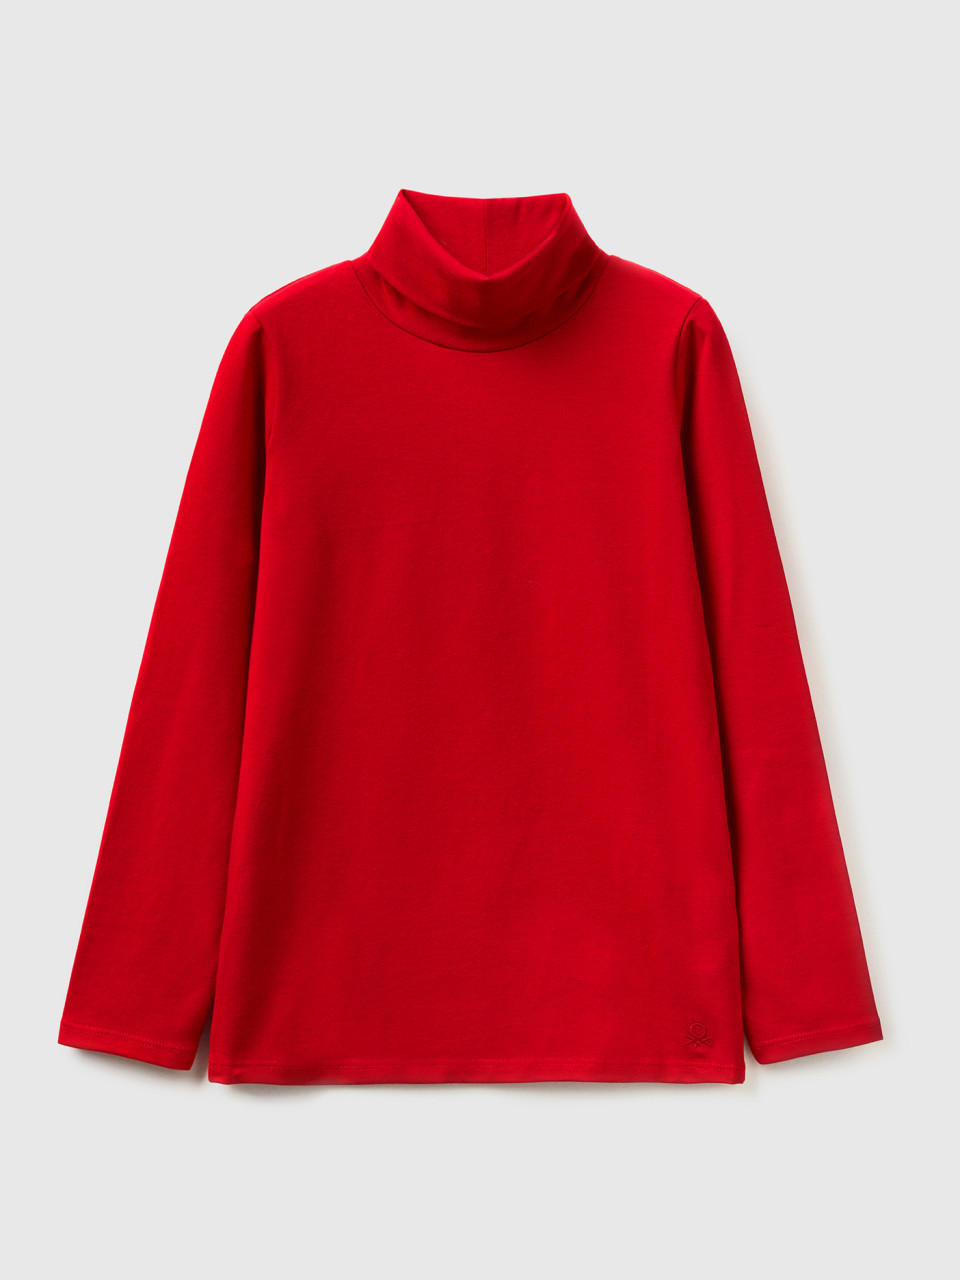 Benetton, Stretch T-shirt With High Neck, Red, Kids